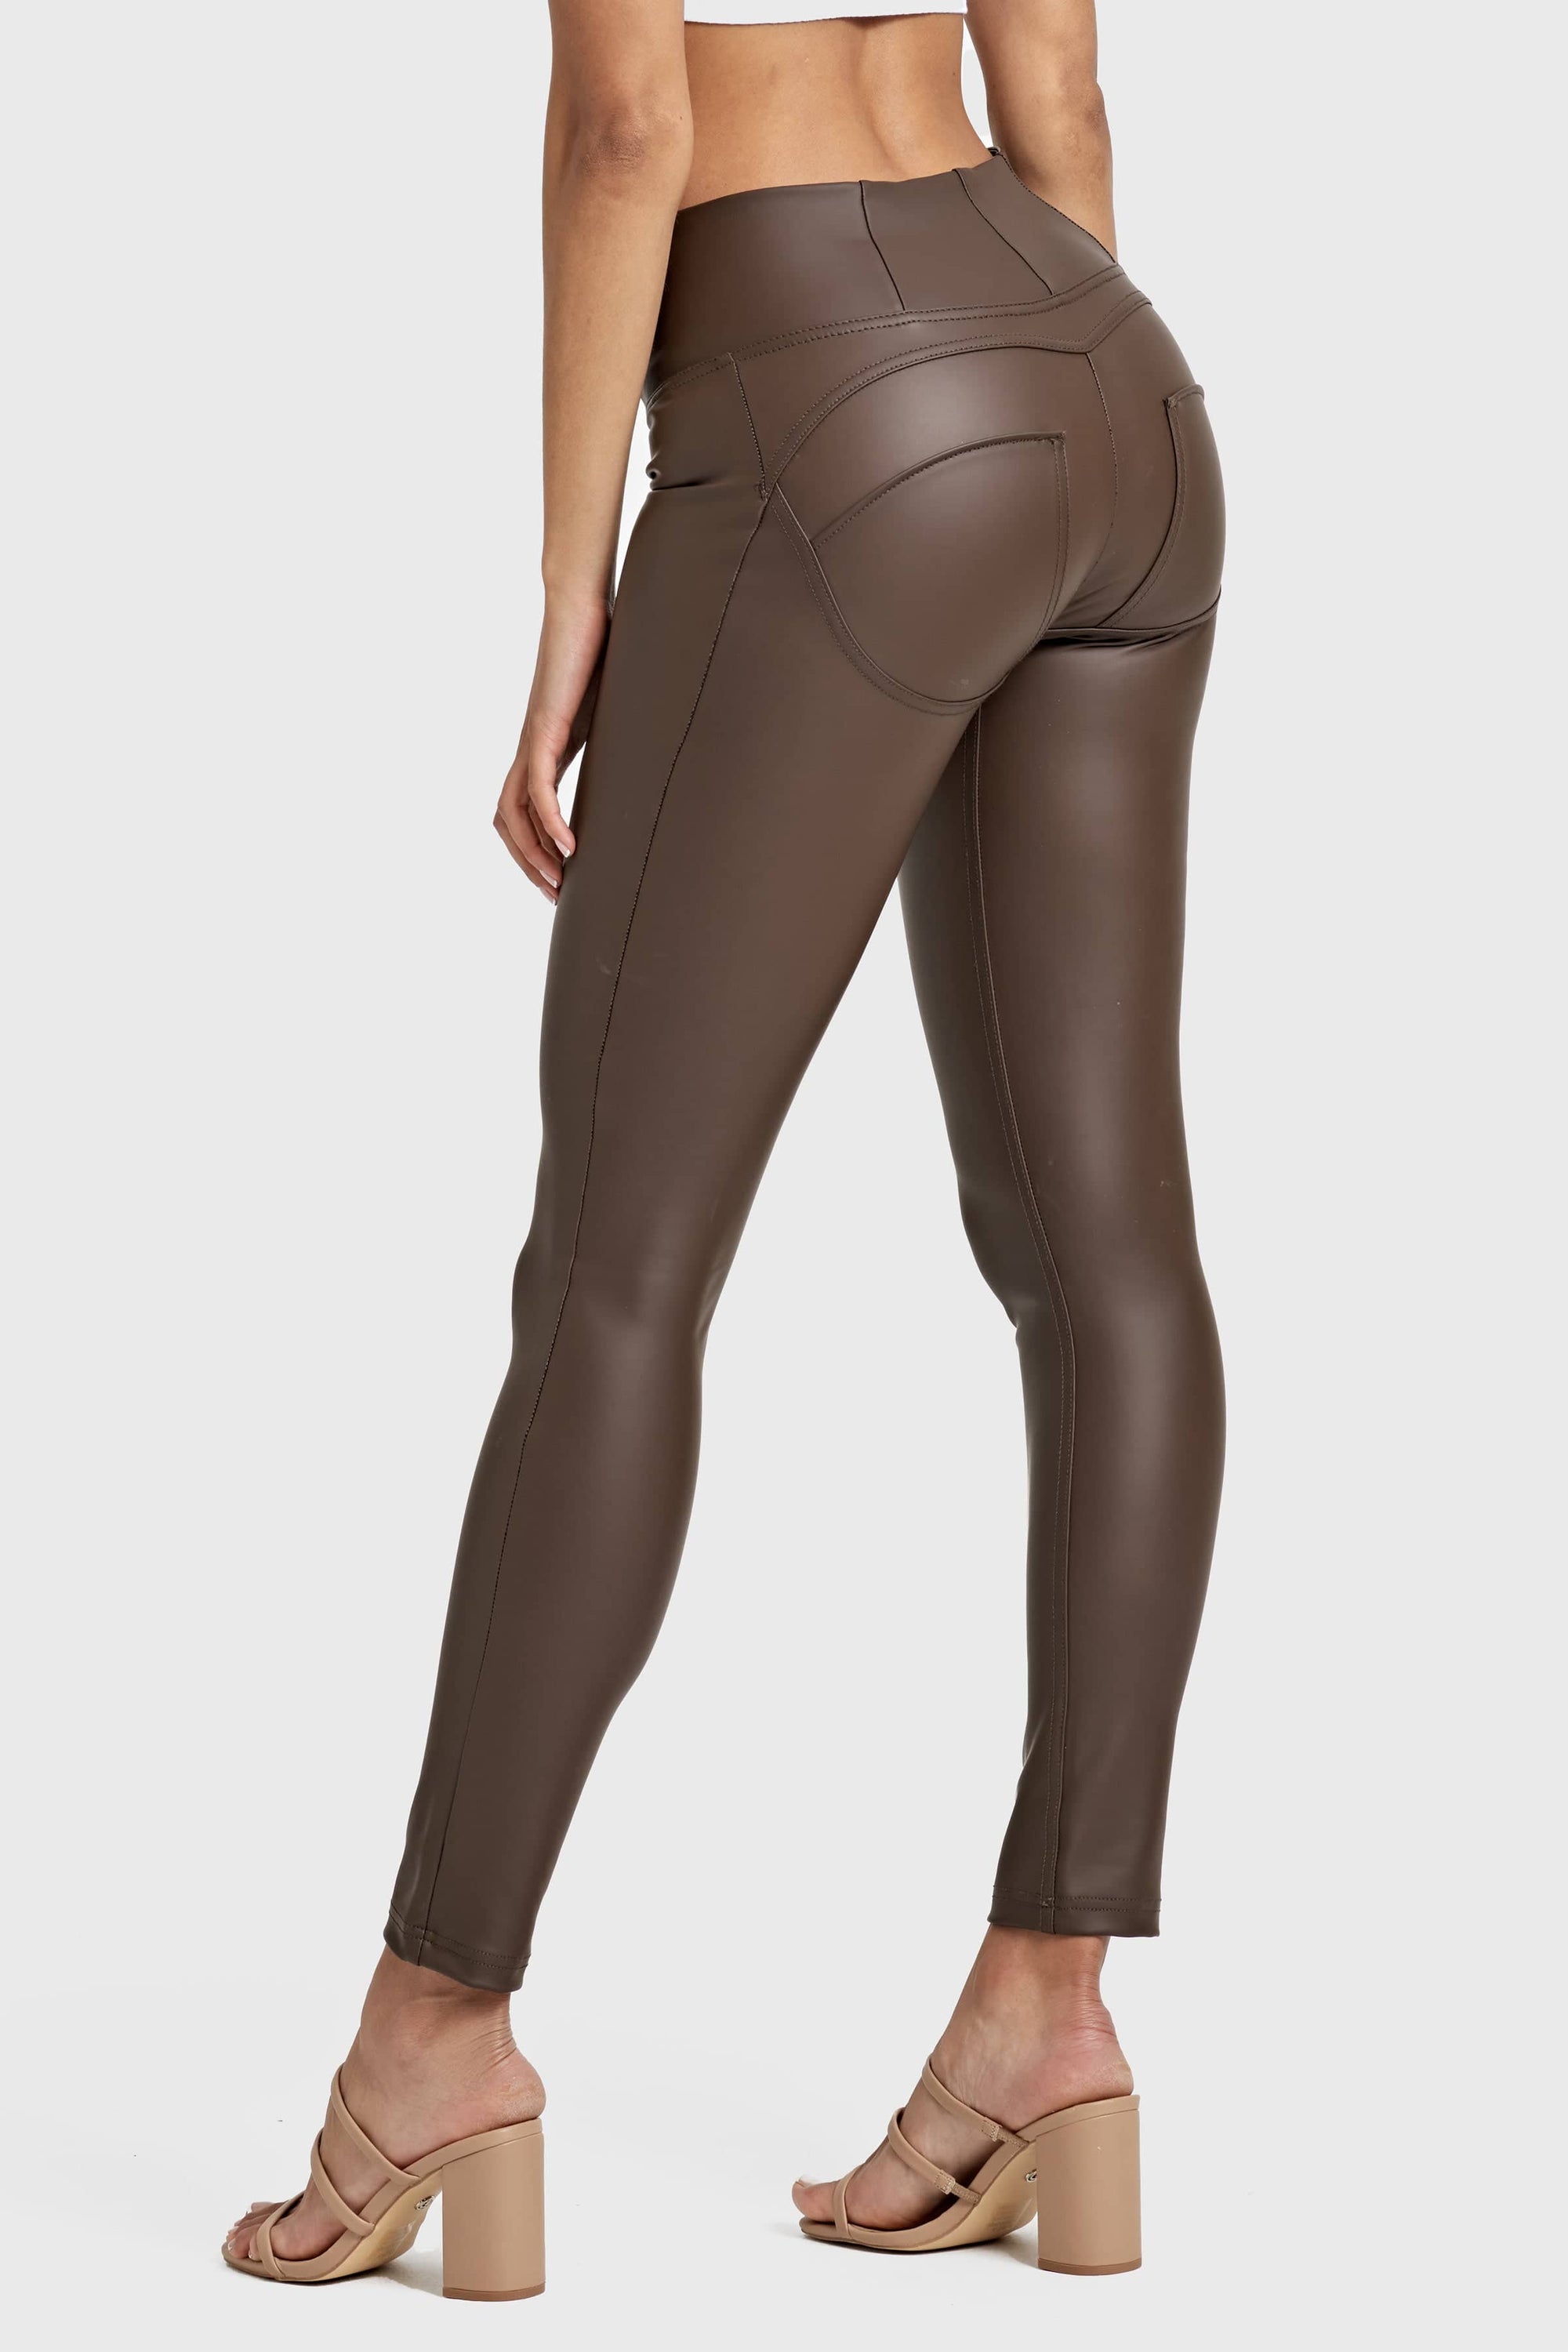 WR.UP® Faux Leather - High Waisted - Petite Length - Chocolate 9